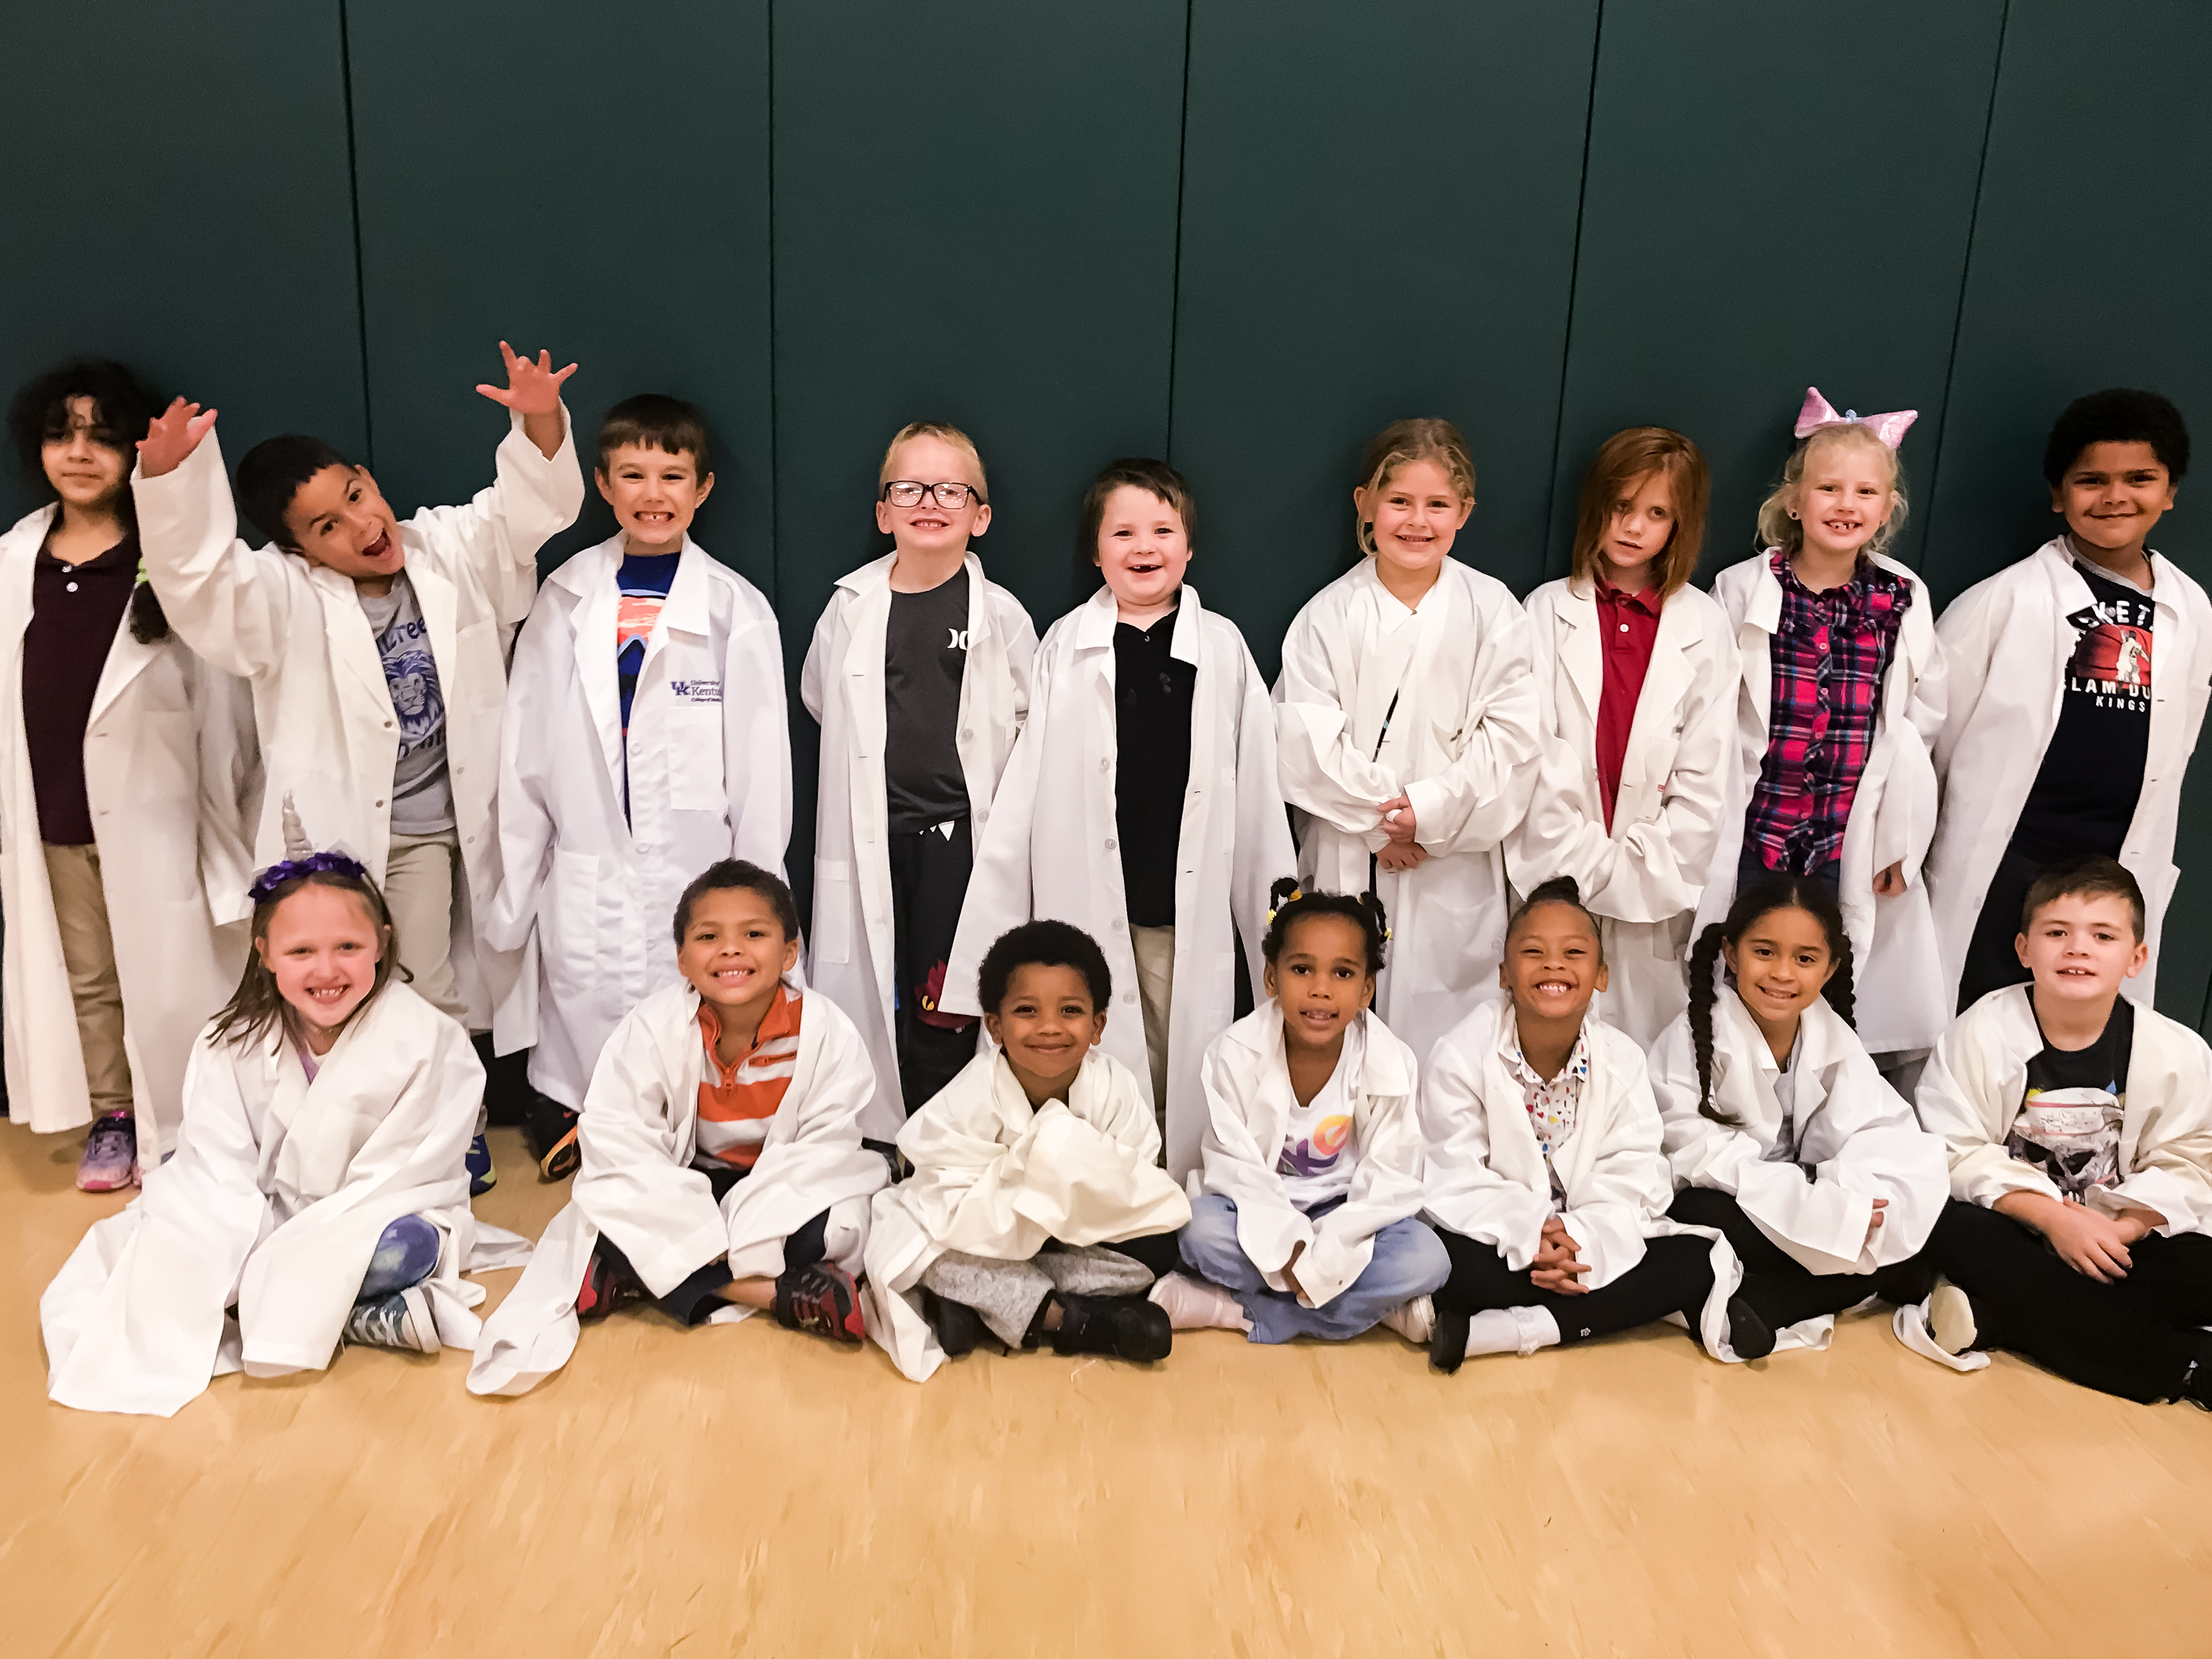 Children in lab coats at event.